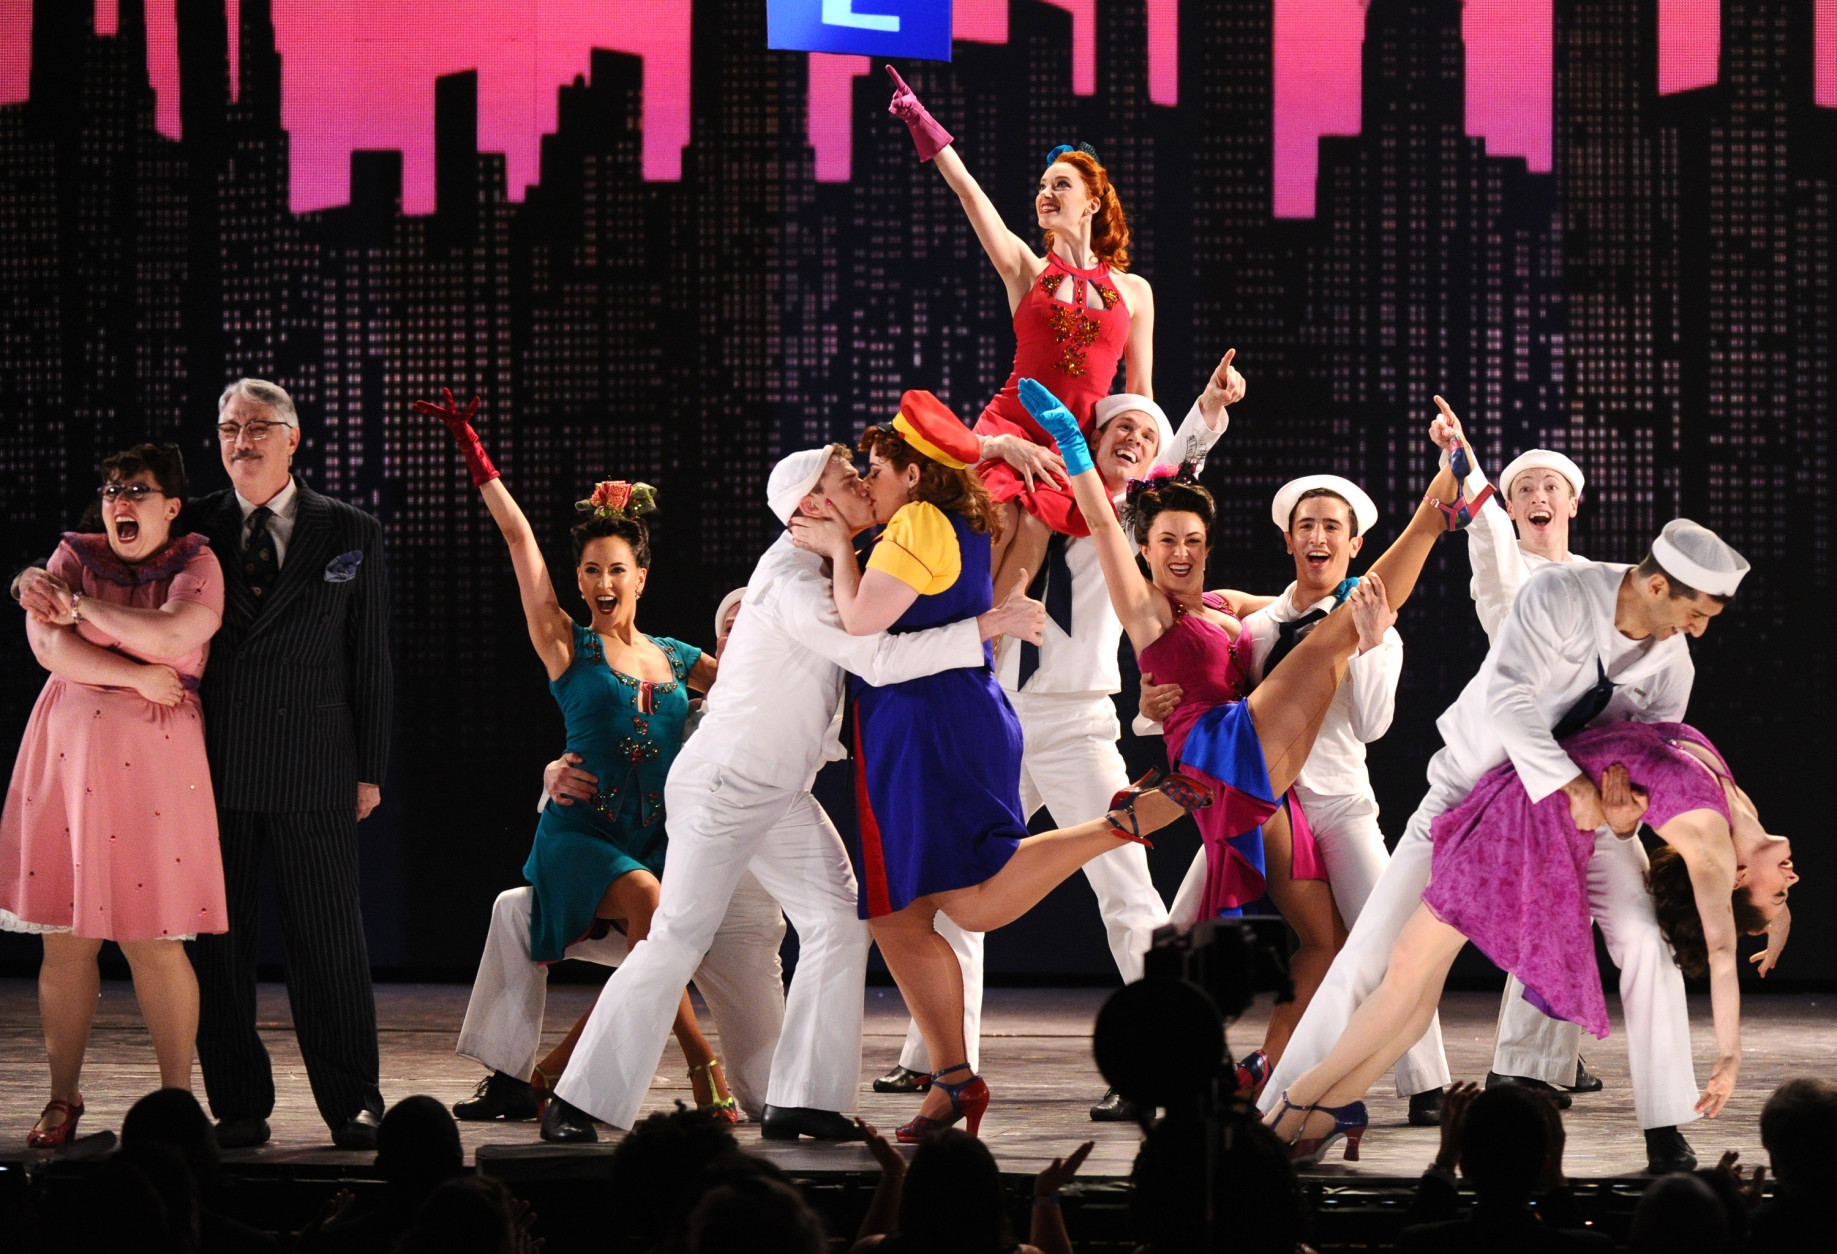 The cast of On the Town performs at the 69th annual Tony Awards at Radio City Music Hall on Sunday, June 7, 2015, in New York. (Photo by Charles Sykes/Invision/AP)